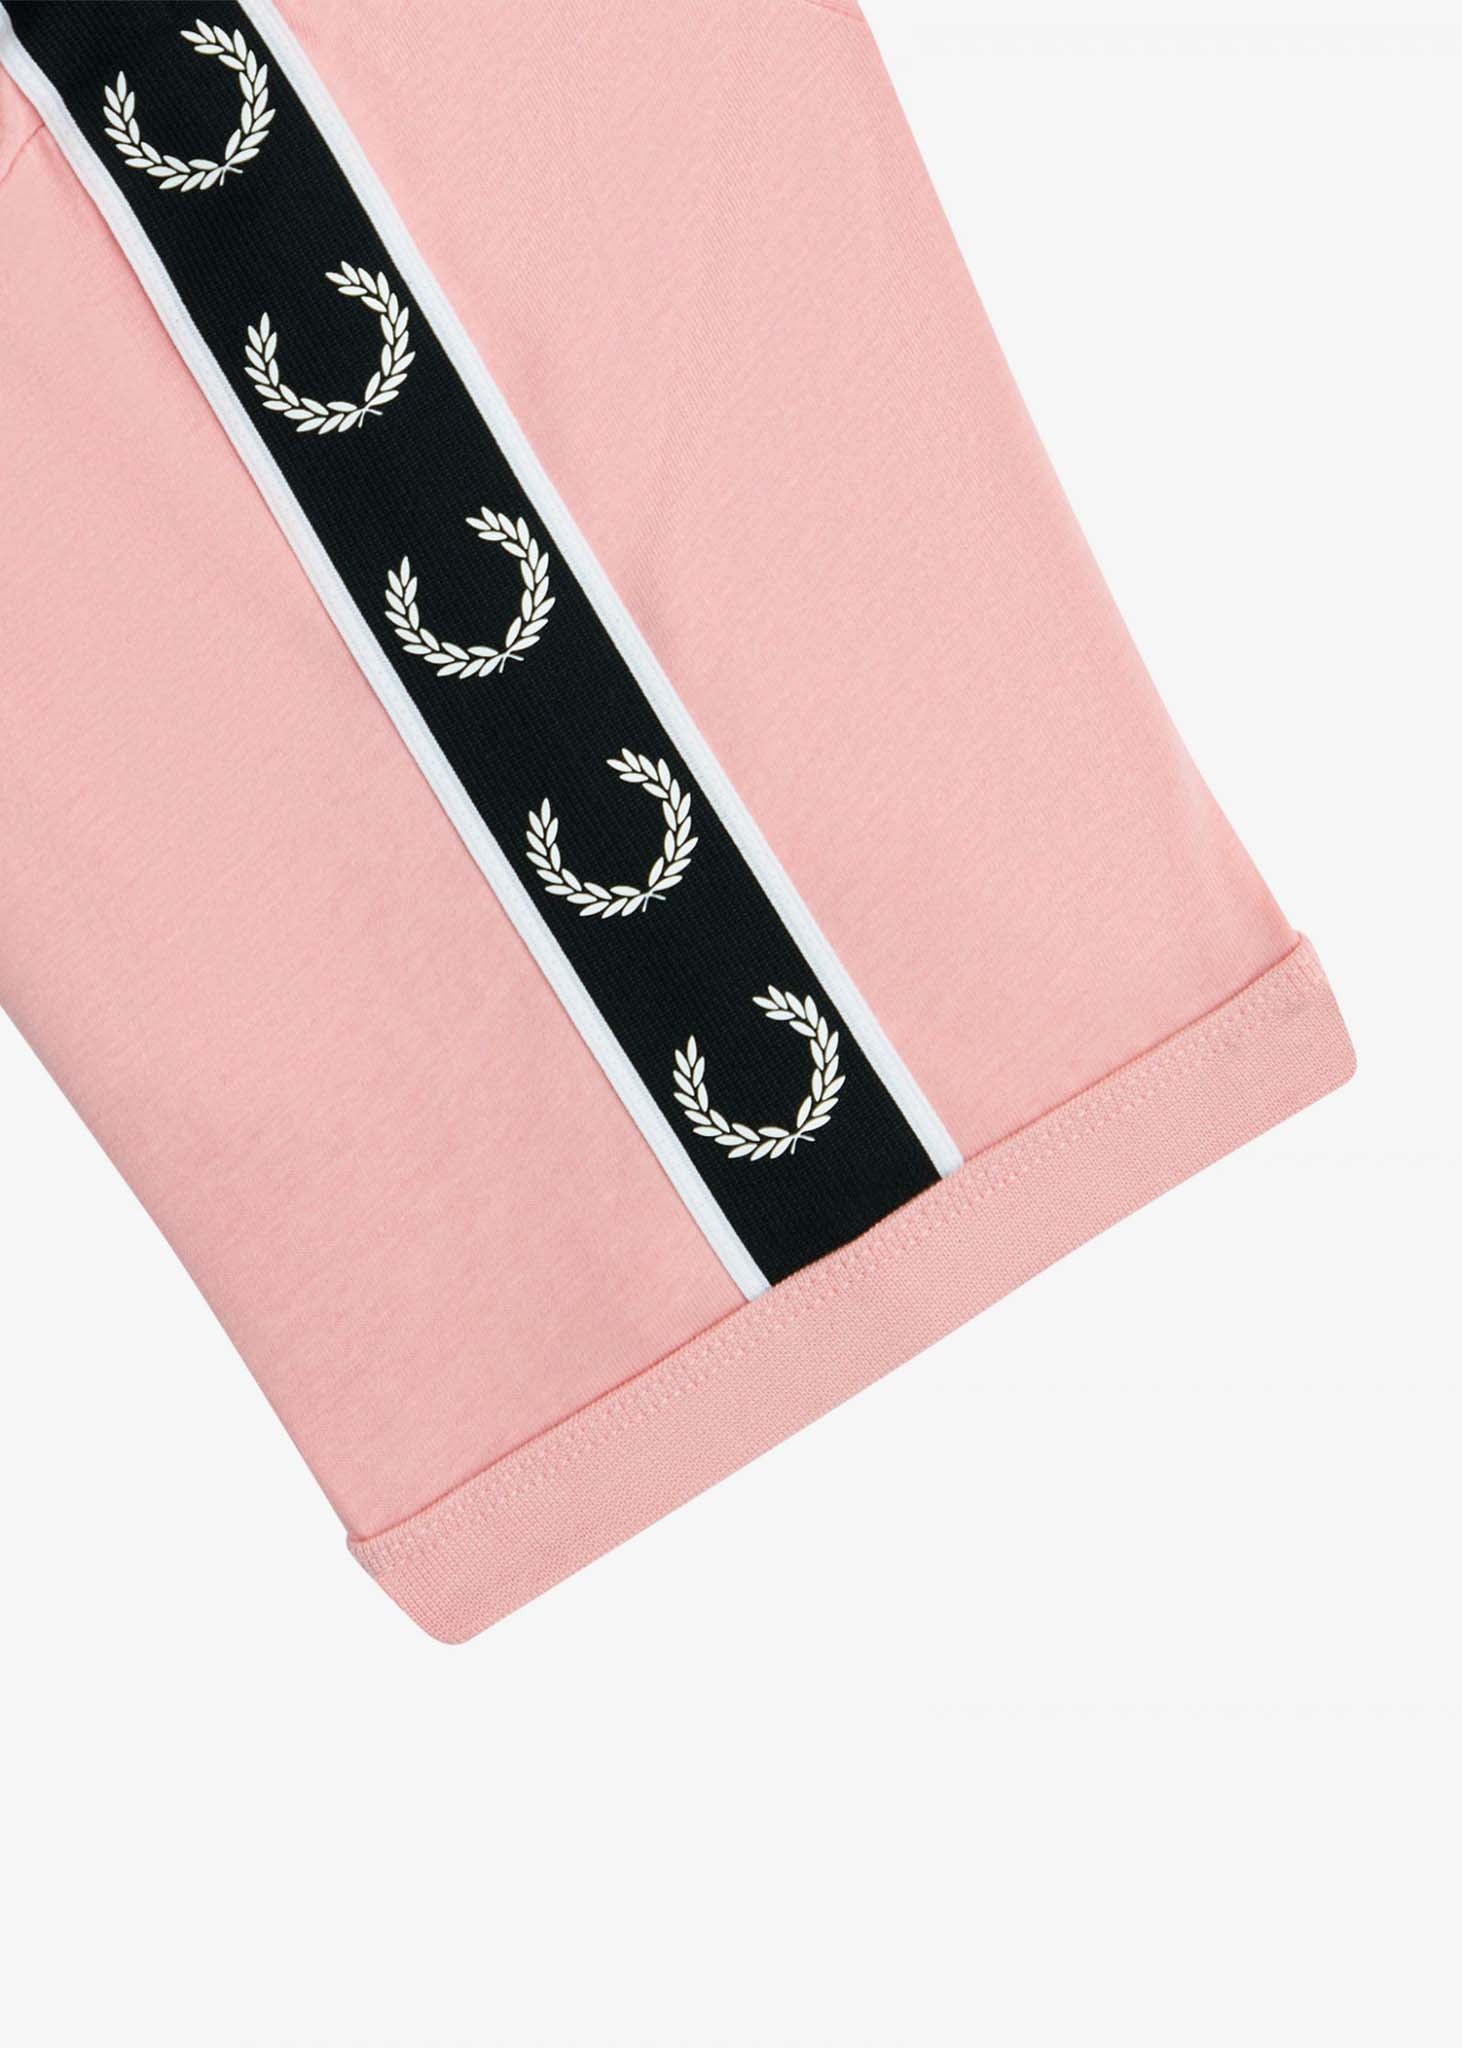 Fred Perry T-shirts  Contrast tape ringer t-shirt - chalky pink black 